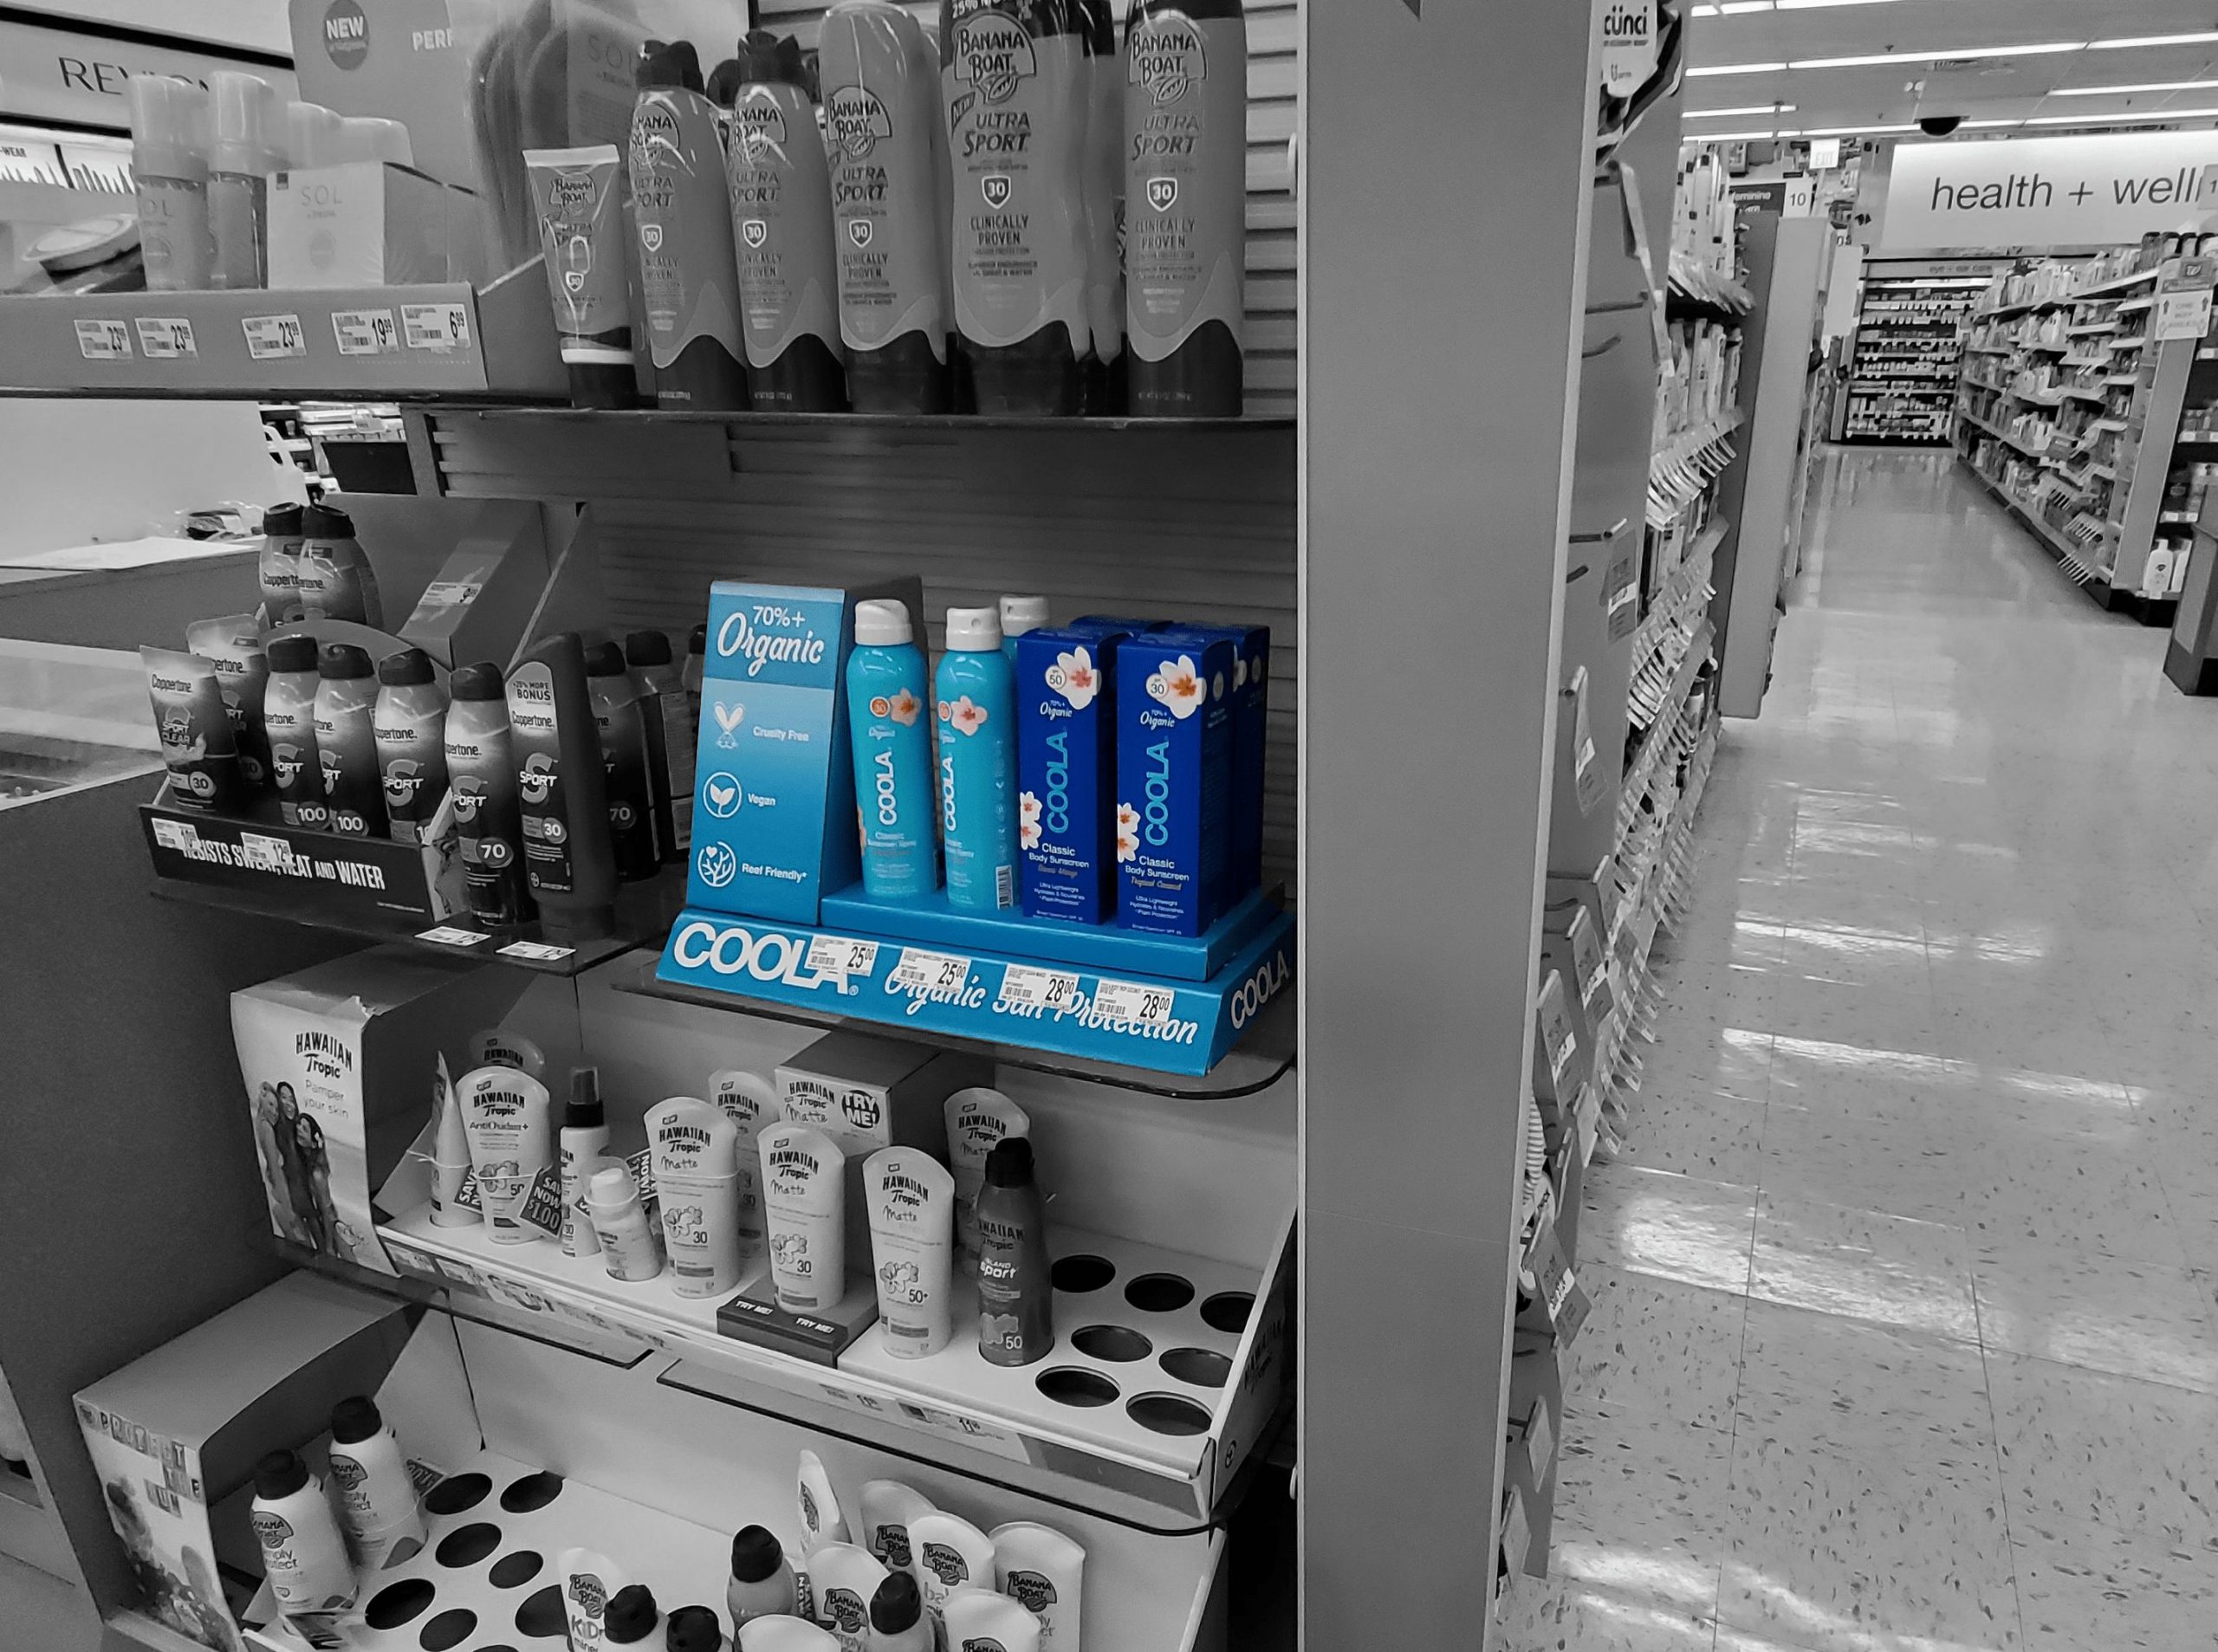 Sunscreen counter display placed on an endcap display